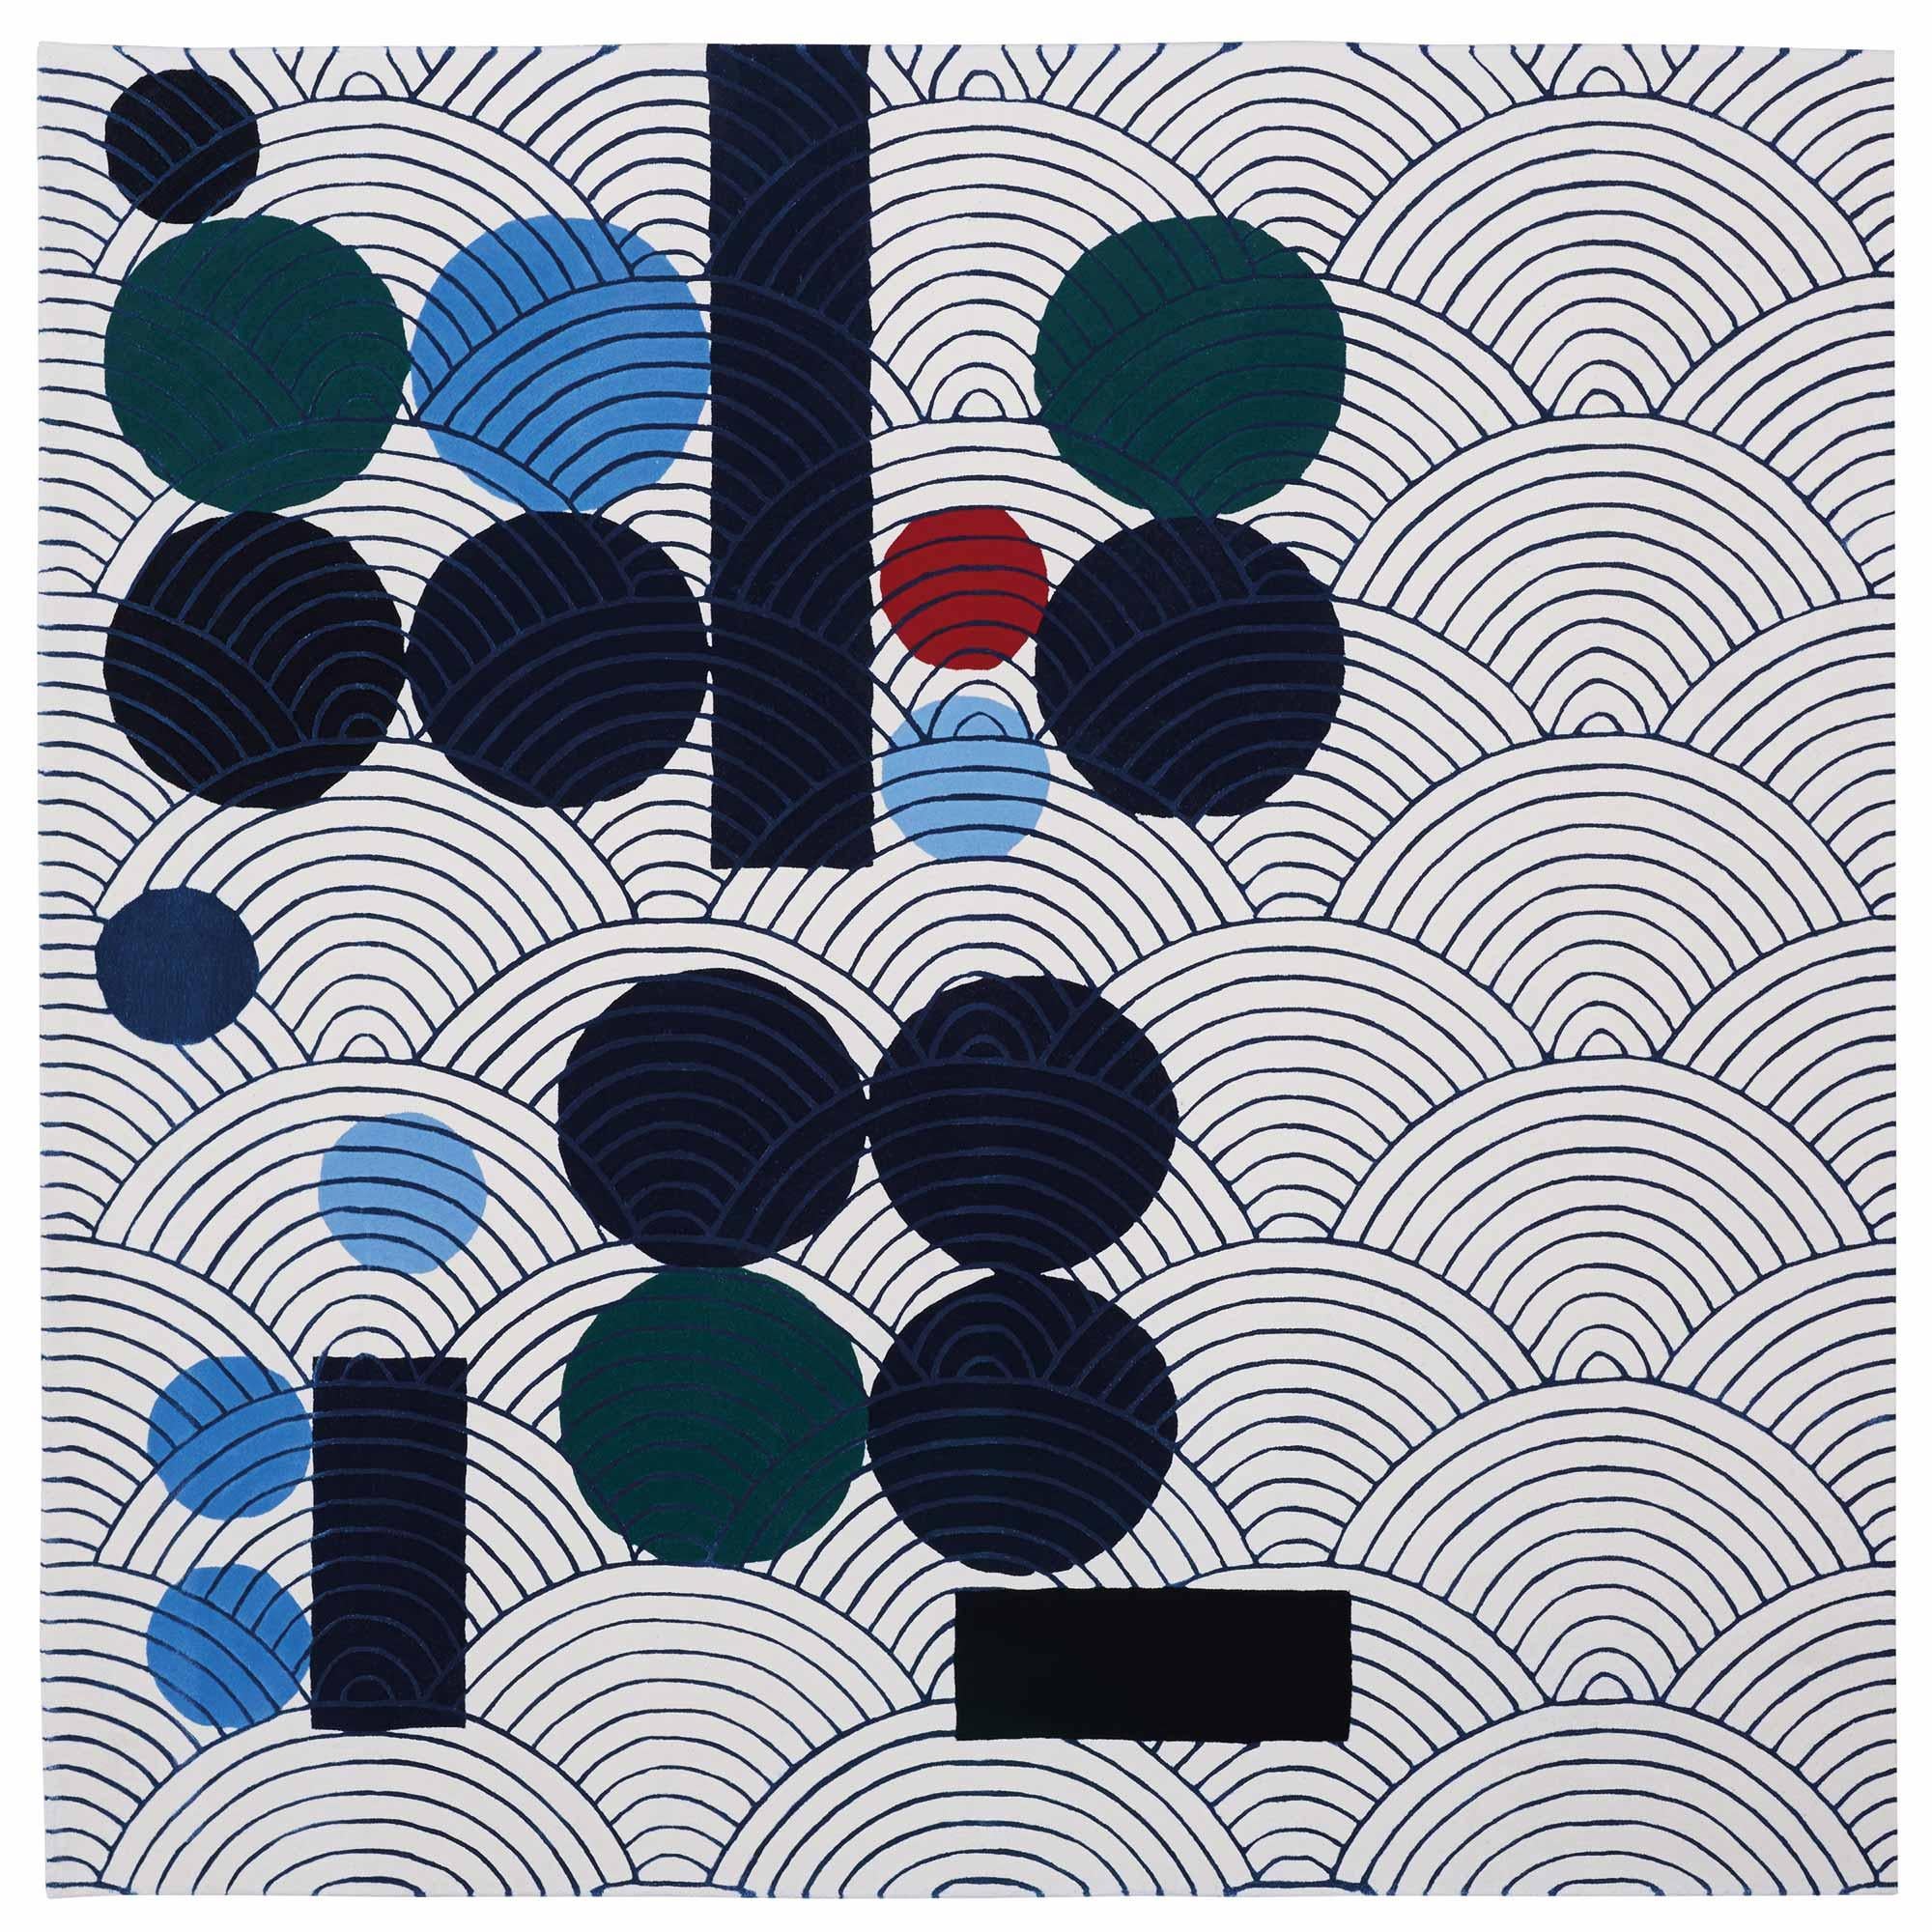 Japanese Abstractions N°4 rug by Thomas Dariel 
Dimensions: D 240 x W 240 cm 
Materials: New Zealand Wool and Viscose. 
Also available in other colors, designs, and dimensions.


Japanese Abstractions is a collection of nine pieces, all